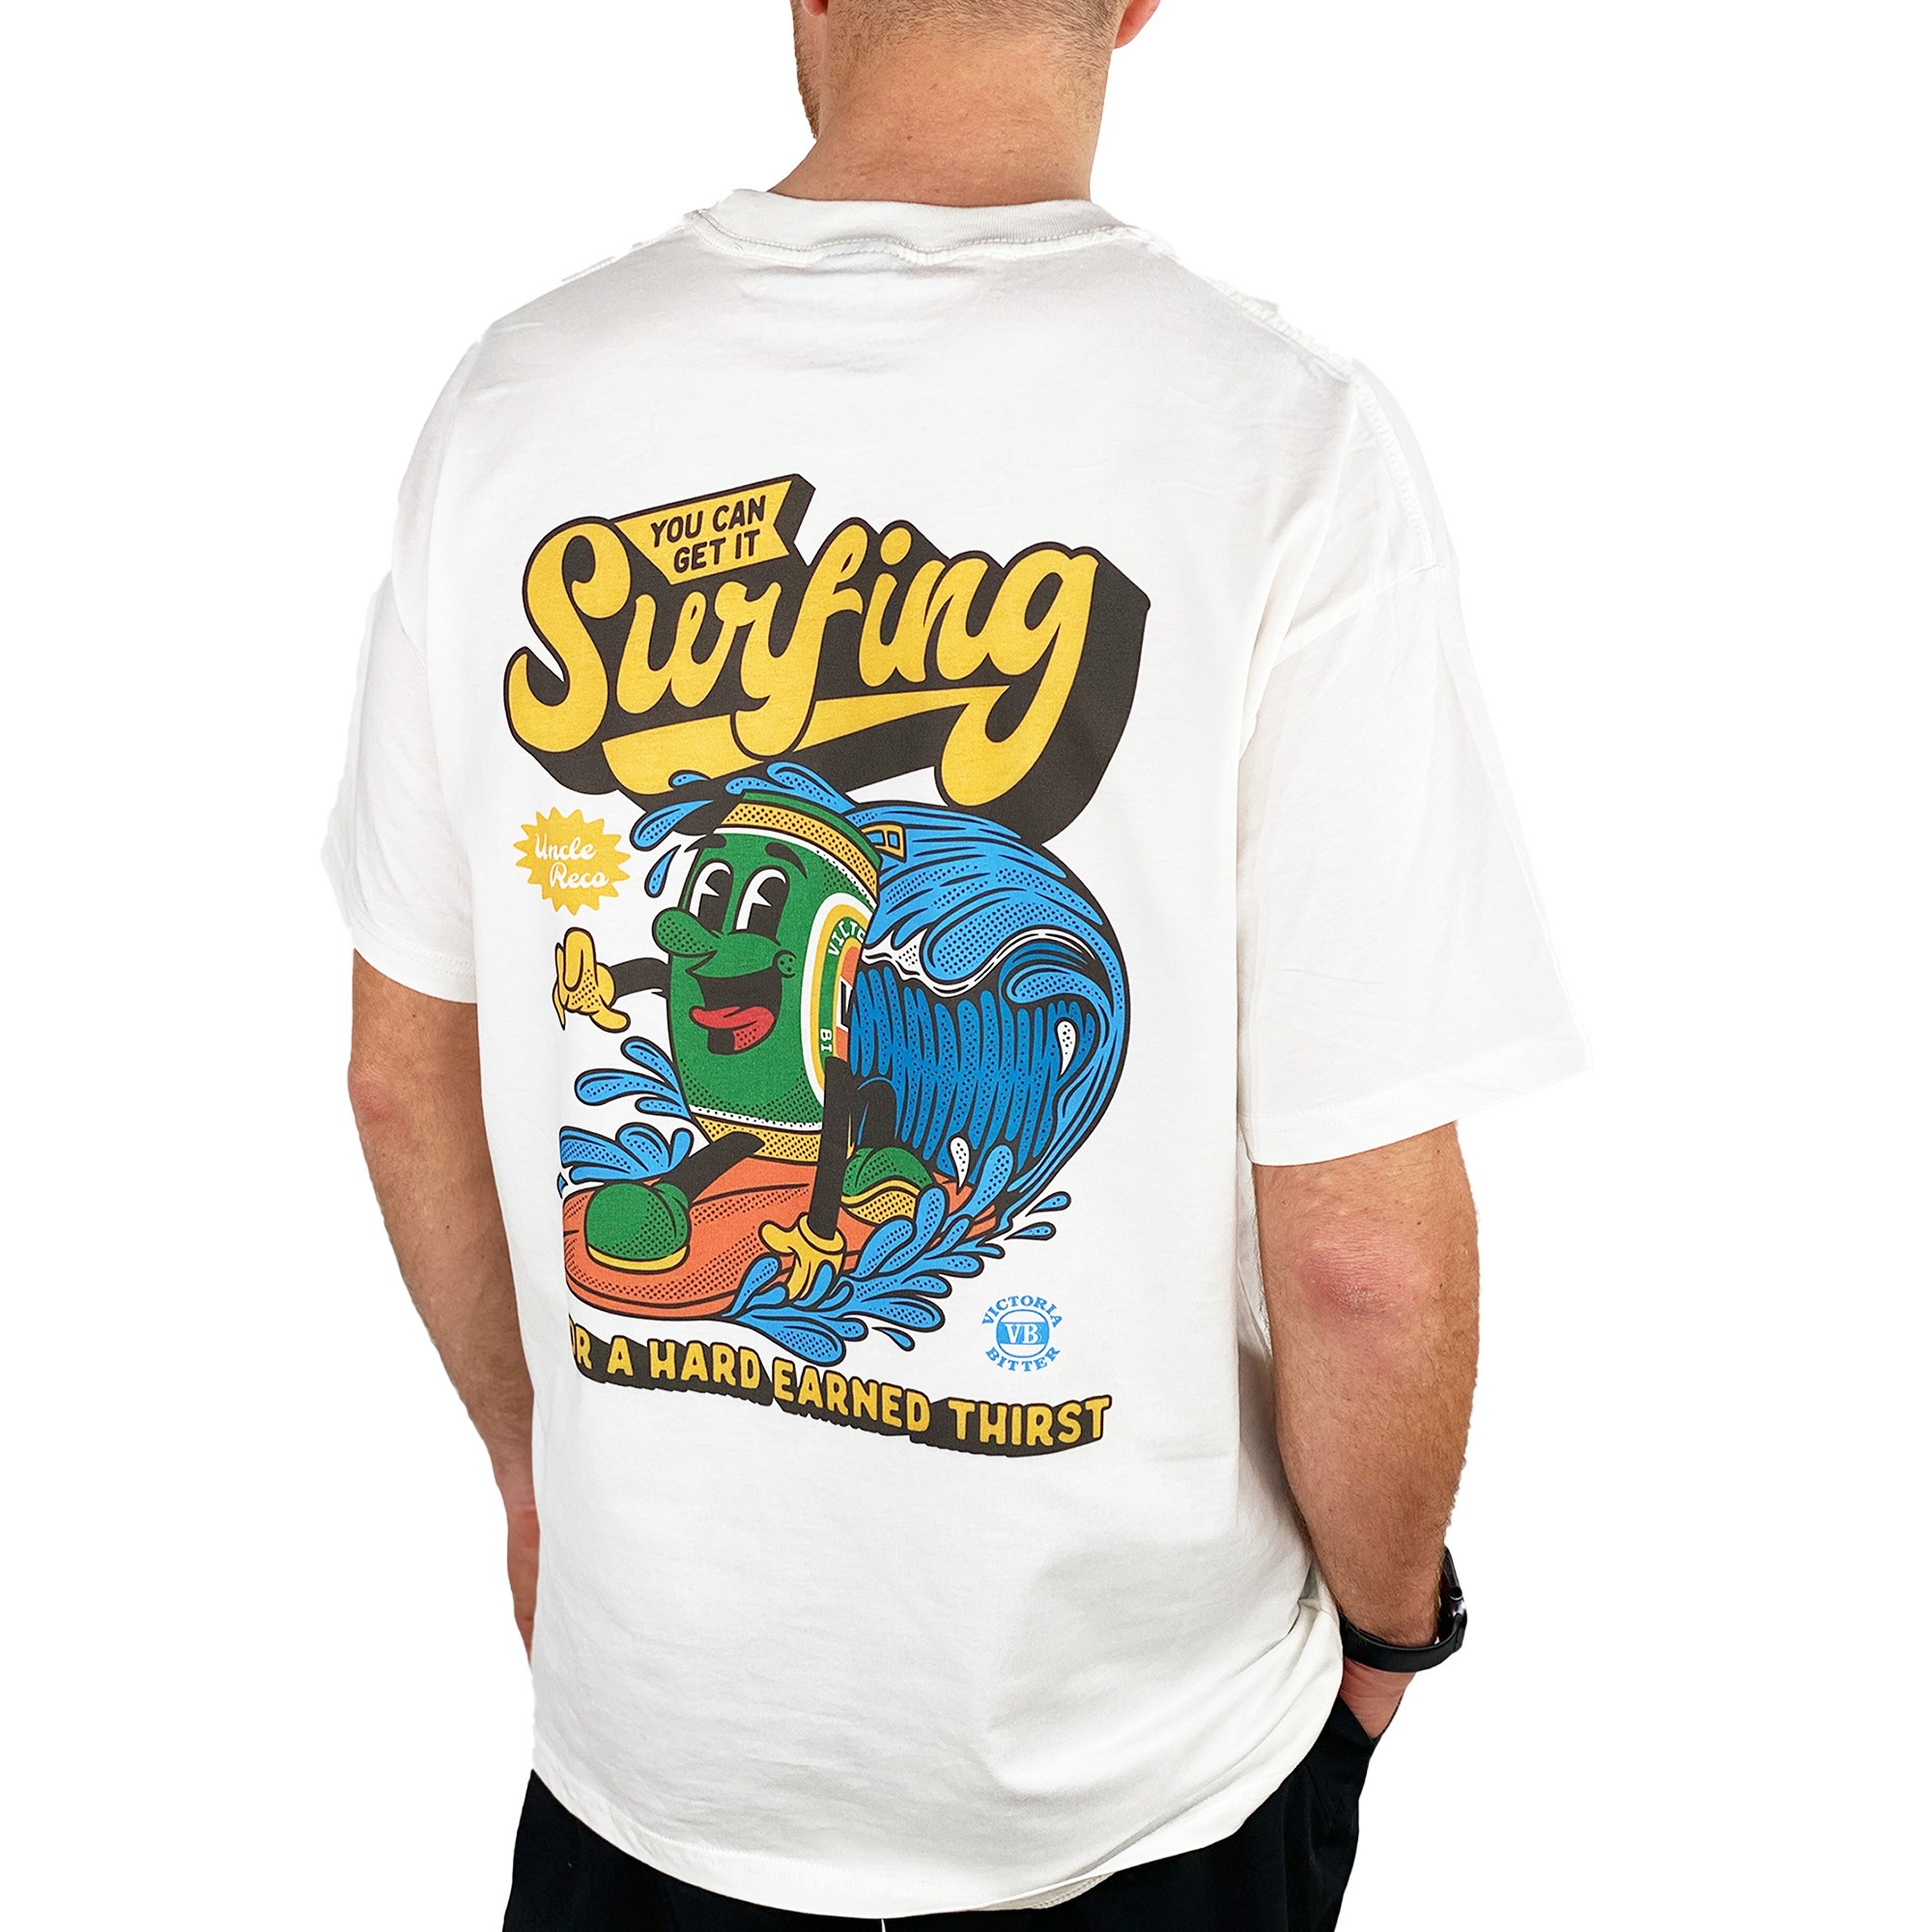 GET IT SURFING FRONT AND BACK VINTAGE TEE, Get It Surfing Front And Back Vintage T-Shirt